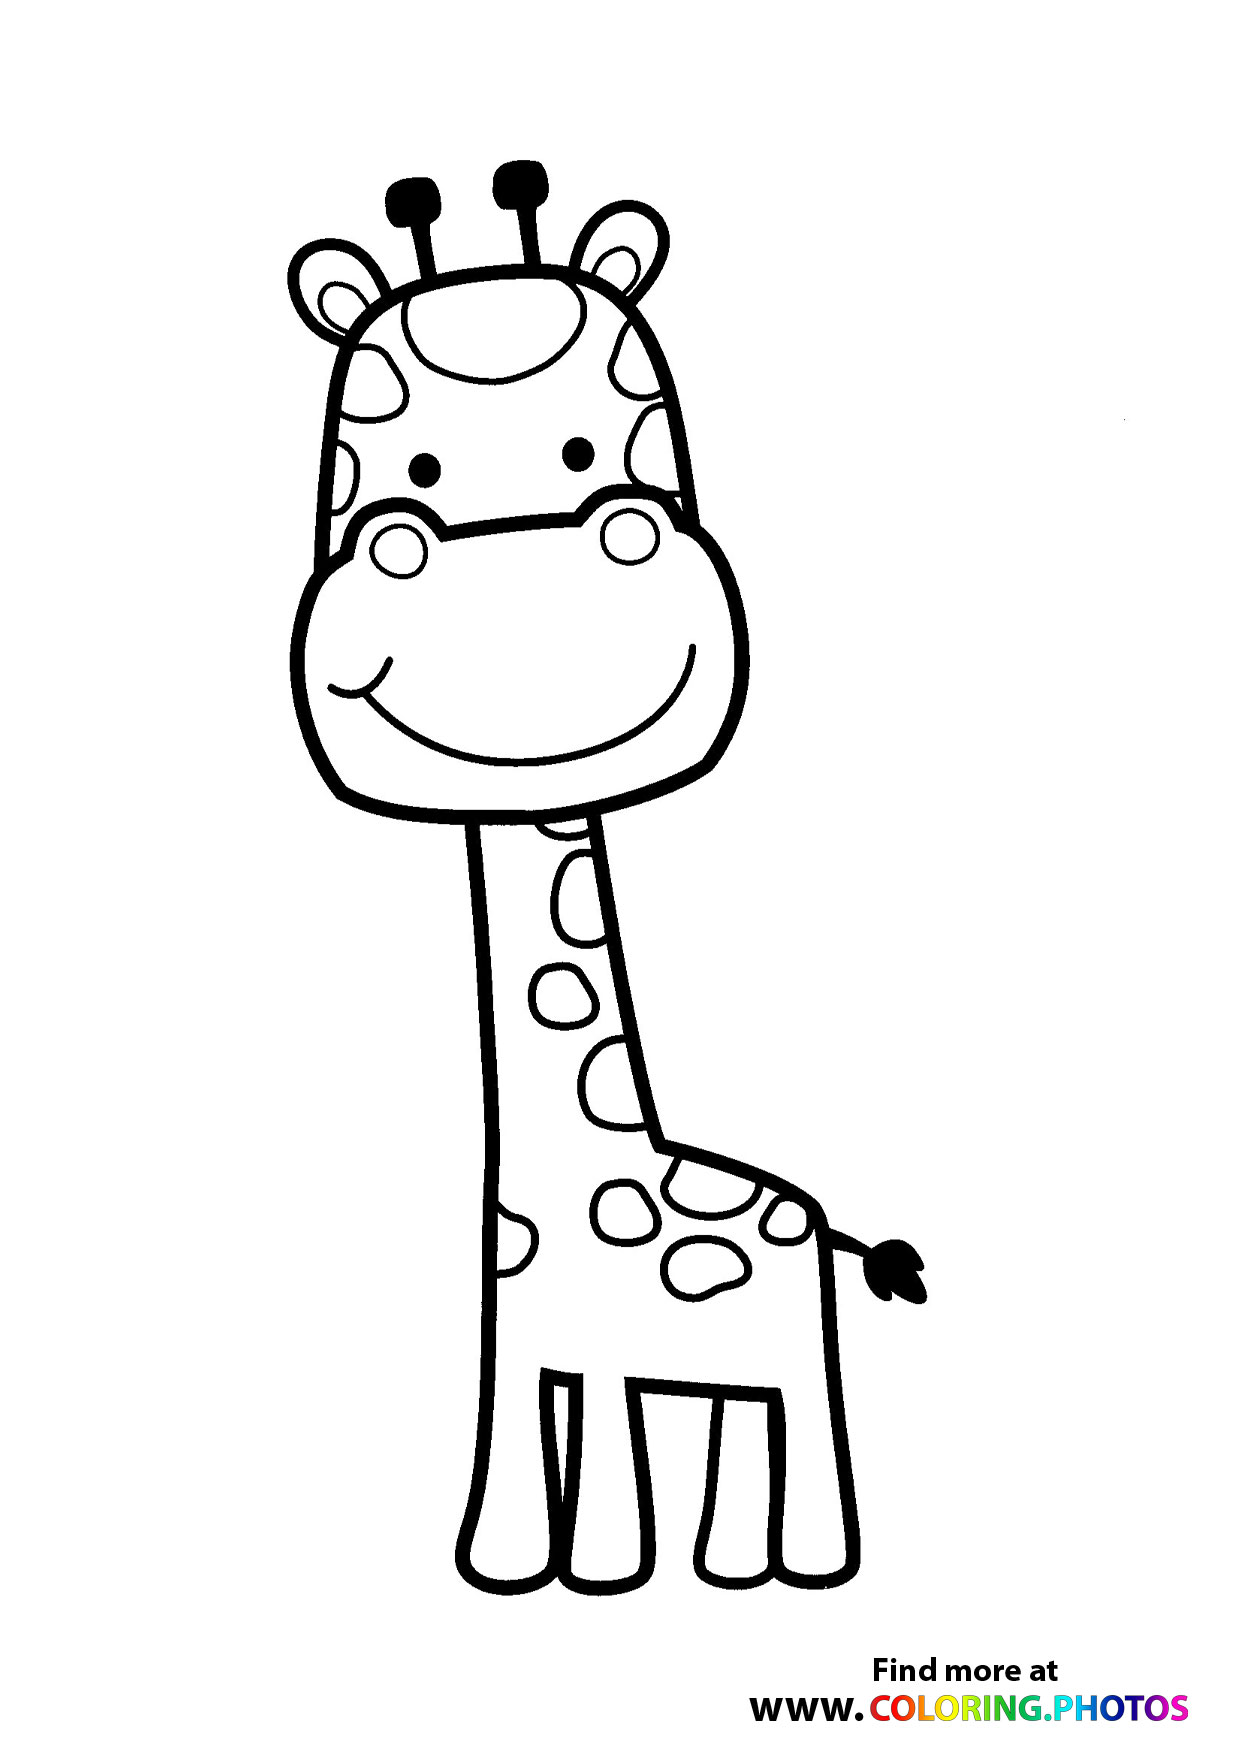 Cute little girafe - Coloring Pages for kids